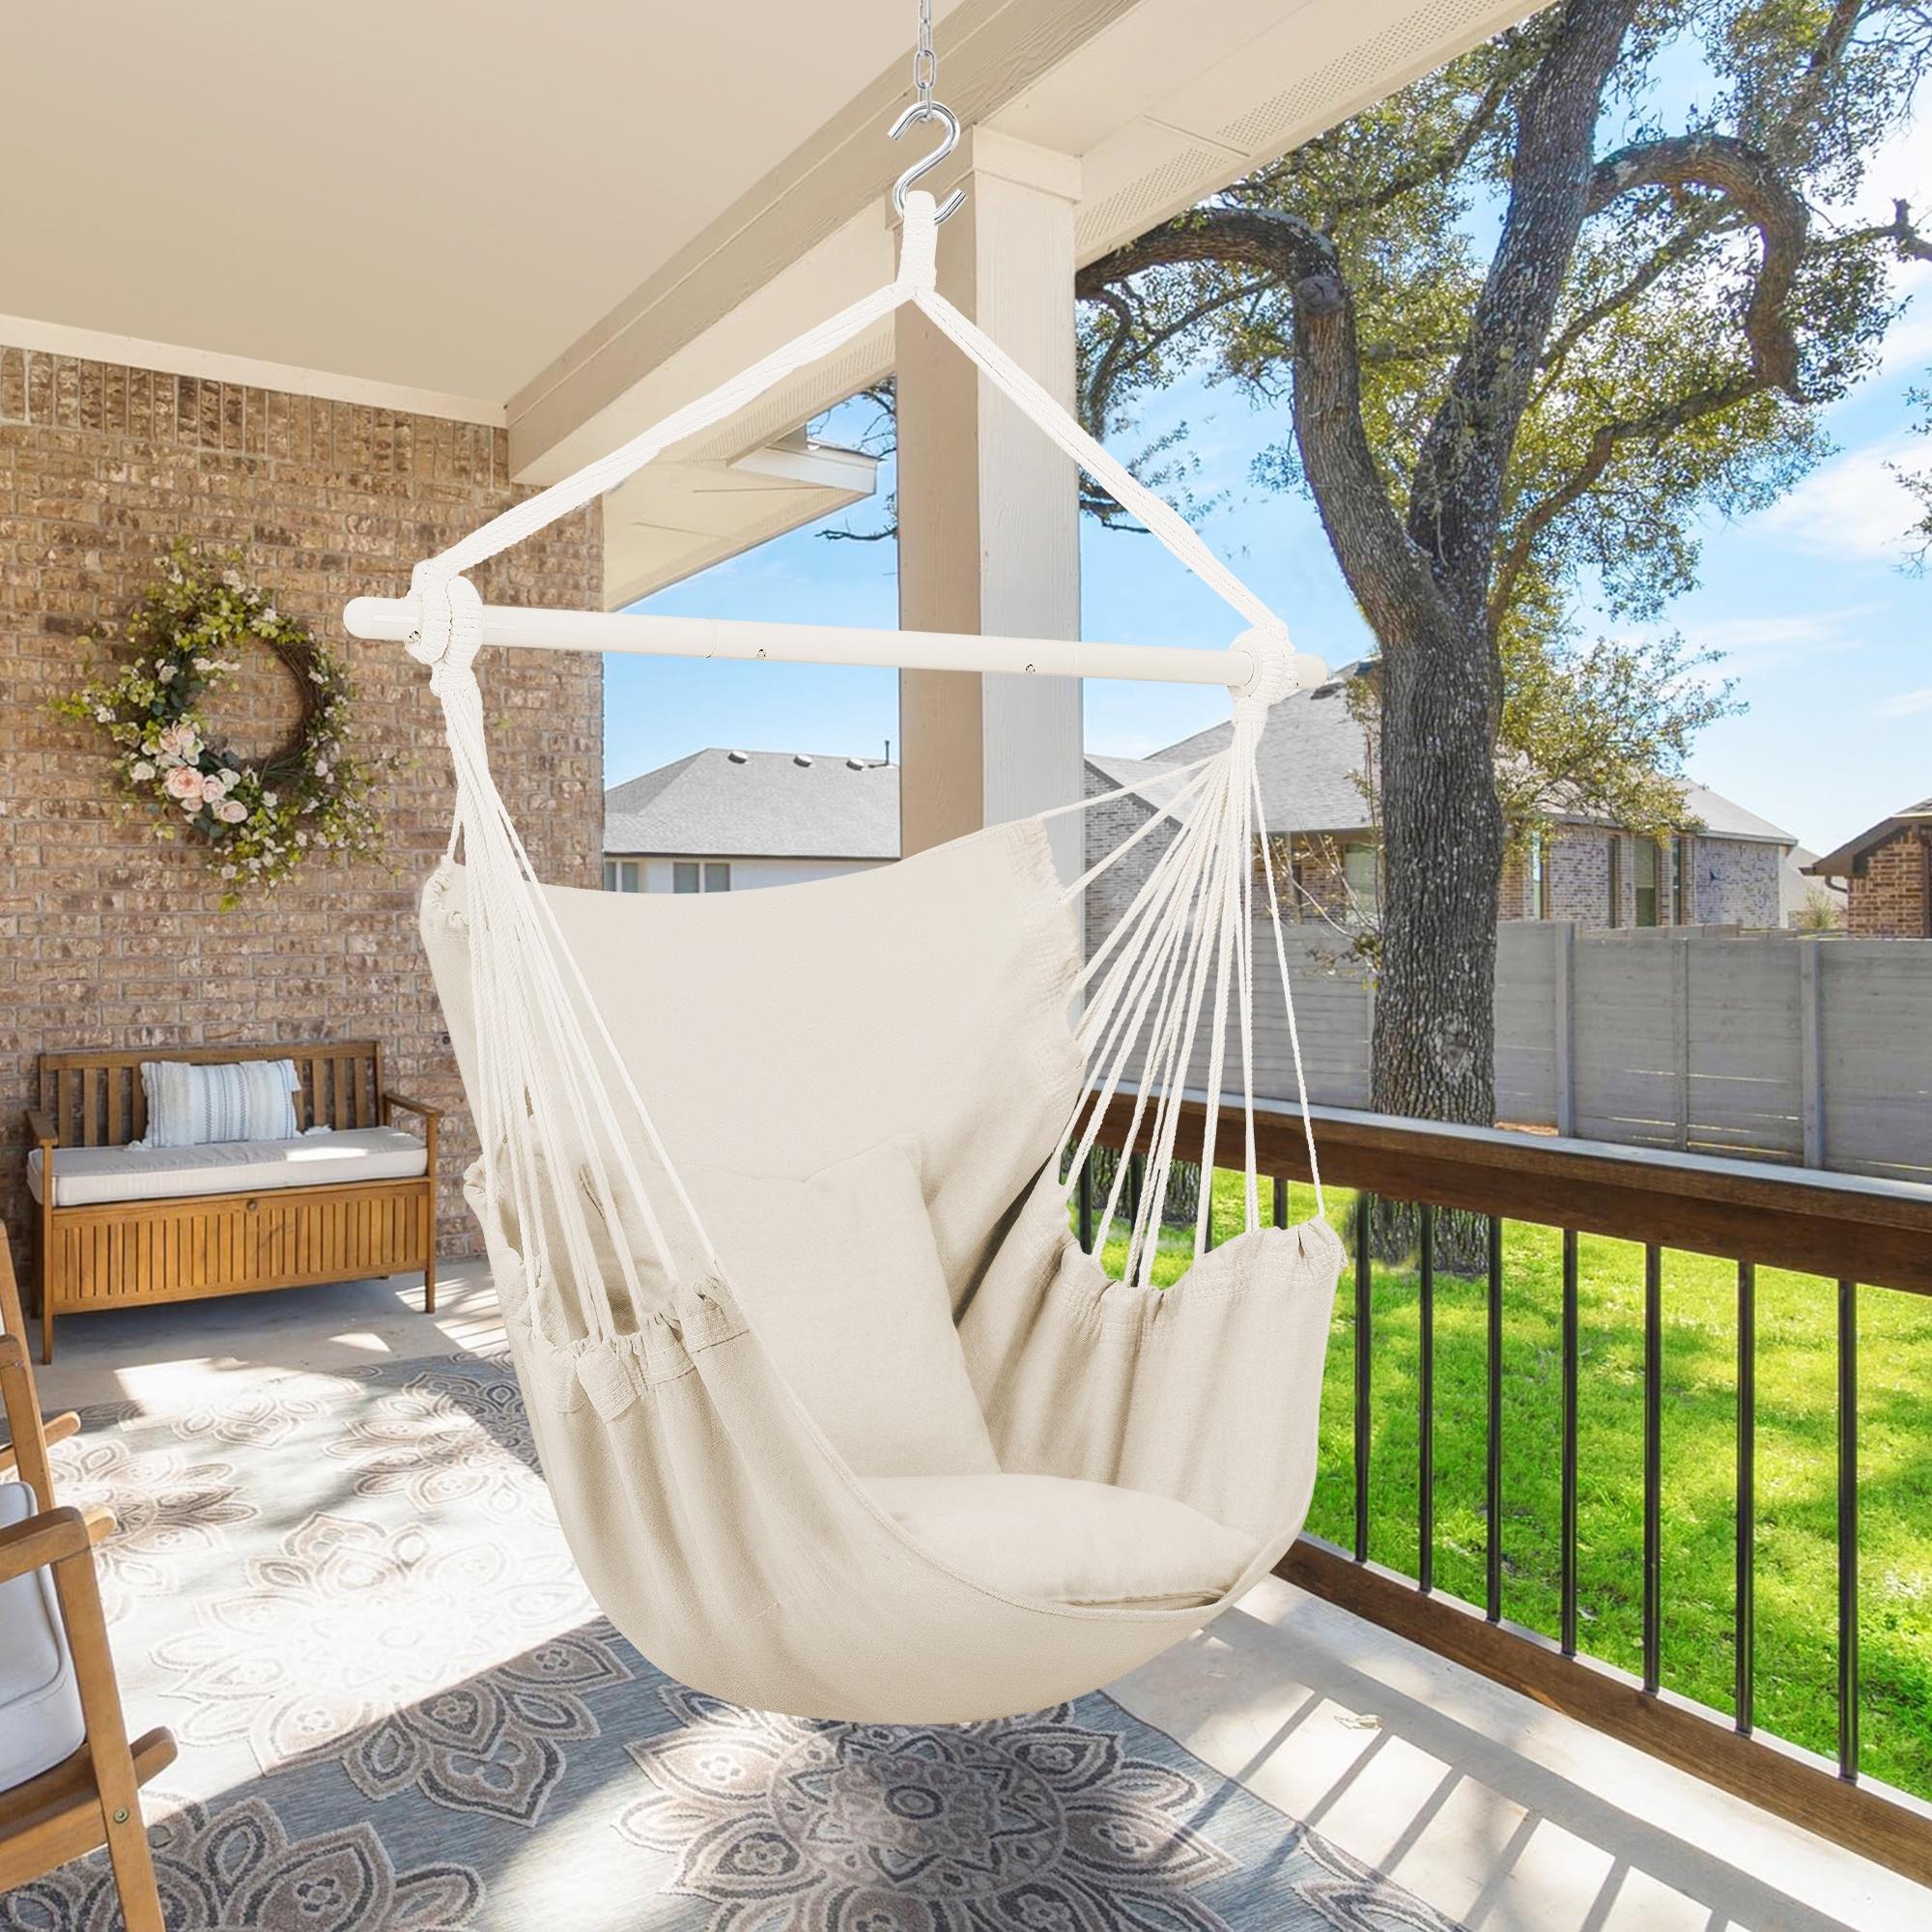 Large Hammock Chair Swing, Relax Hanging Rope Swing Chair with Detachable Metal Support Bar & Two Seat Cushions, Cotton Hammock Chair Swing Seat for Yard Bedroom Patio Porch Indoor Outdoor - image 2 of 10